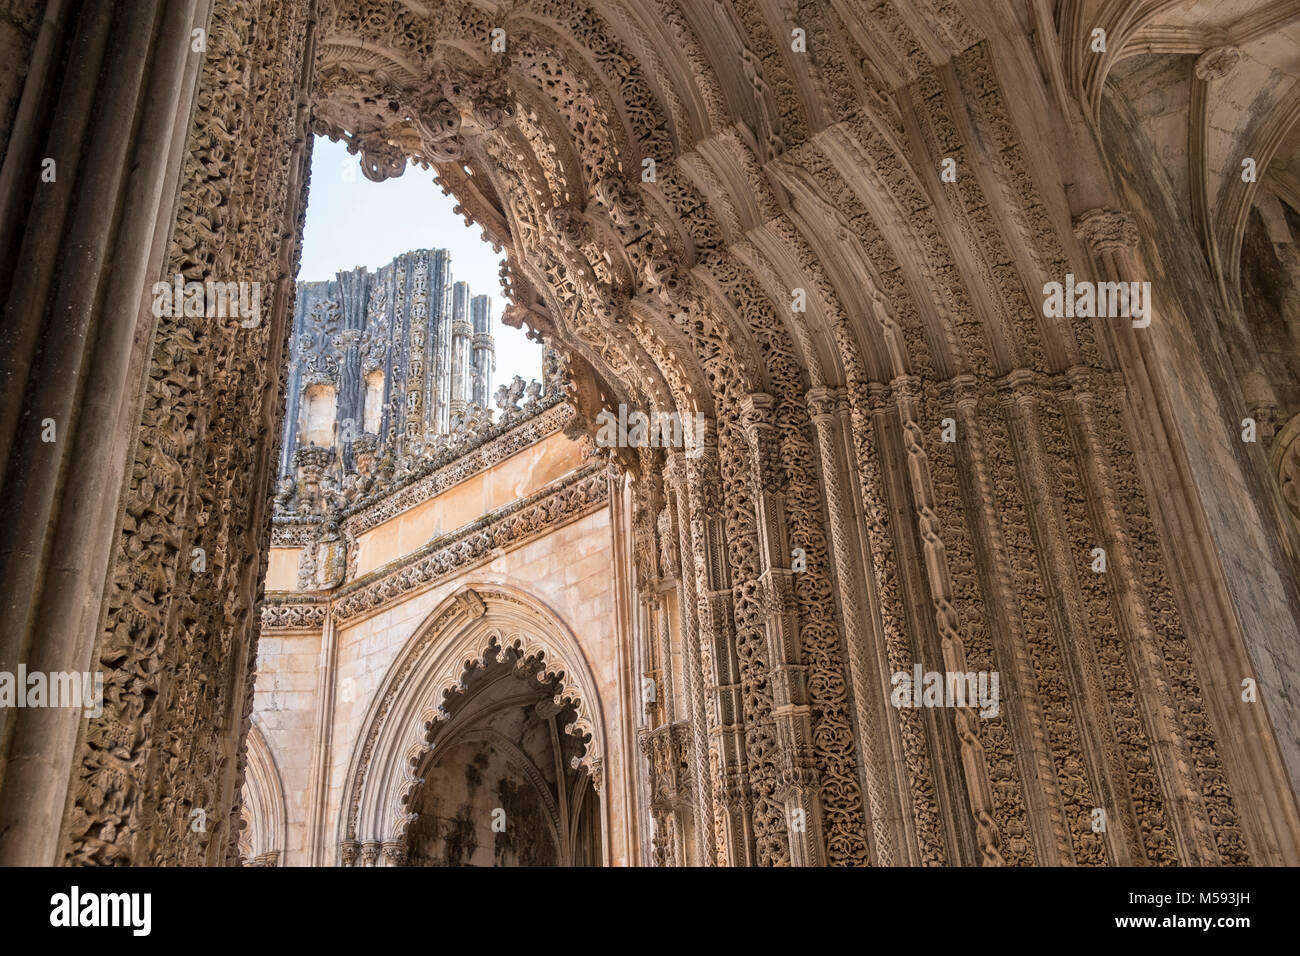 The Unfinished Chapel Batalha Monastery Late Gothic architecture in Portugal, intermingled with the Manueline style), Batalha, Leiria Region, Portugal Stock Photo